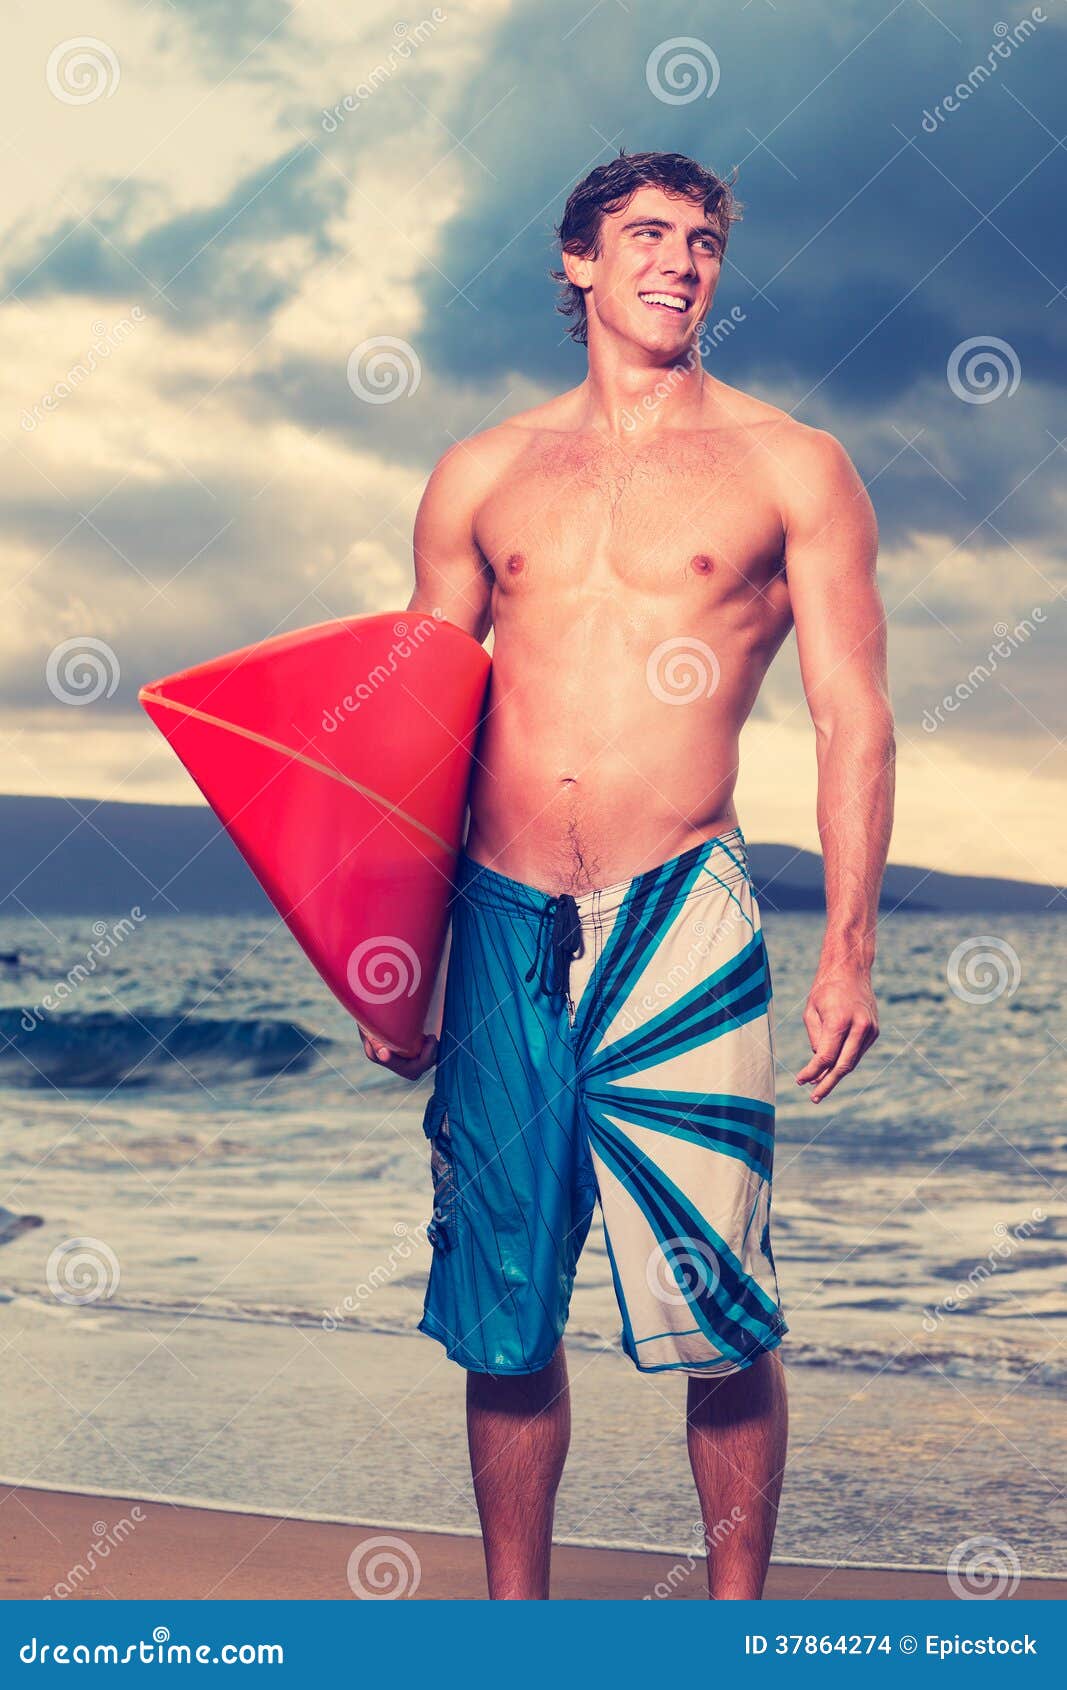 Surfer stock photo. Image of good, board, masculine, people - 37864274